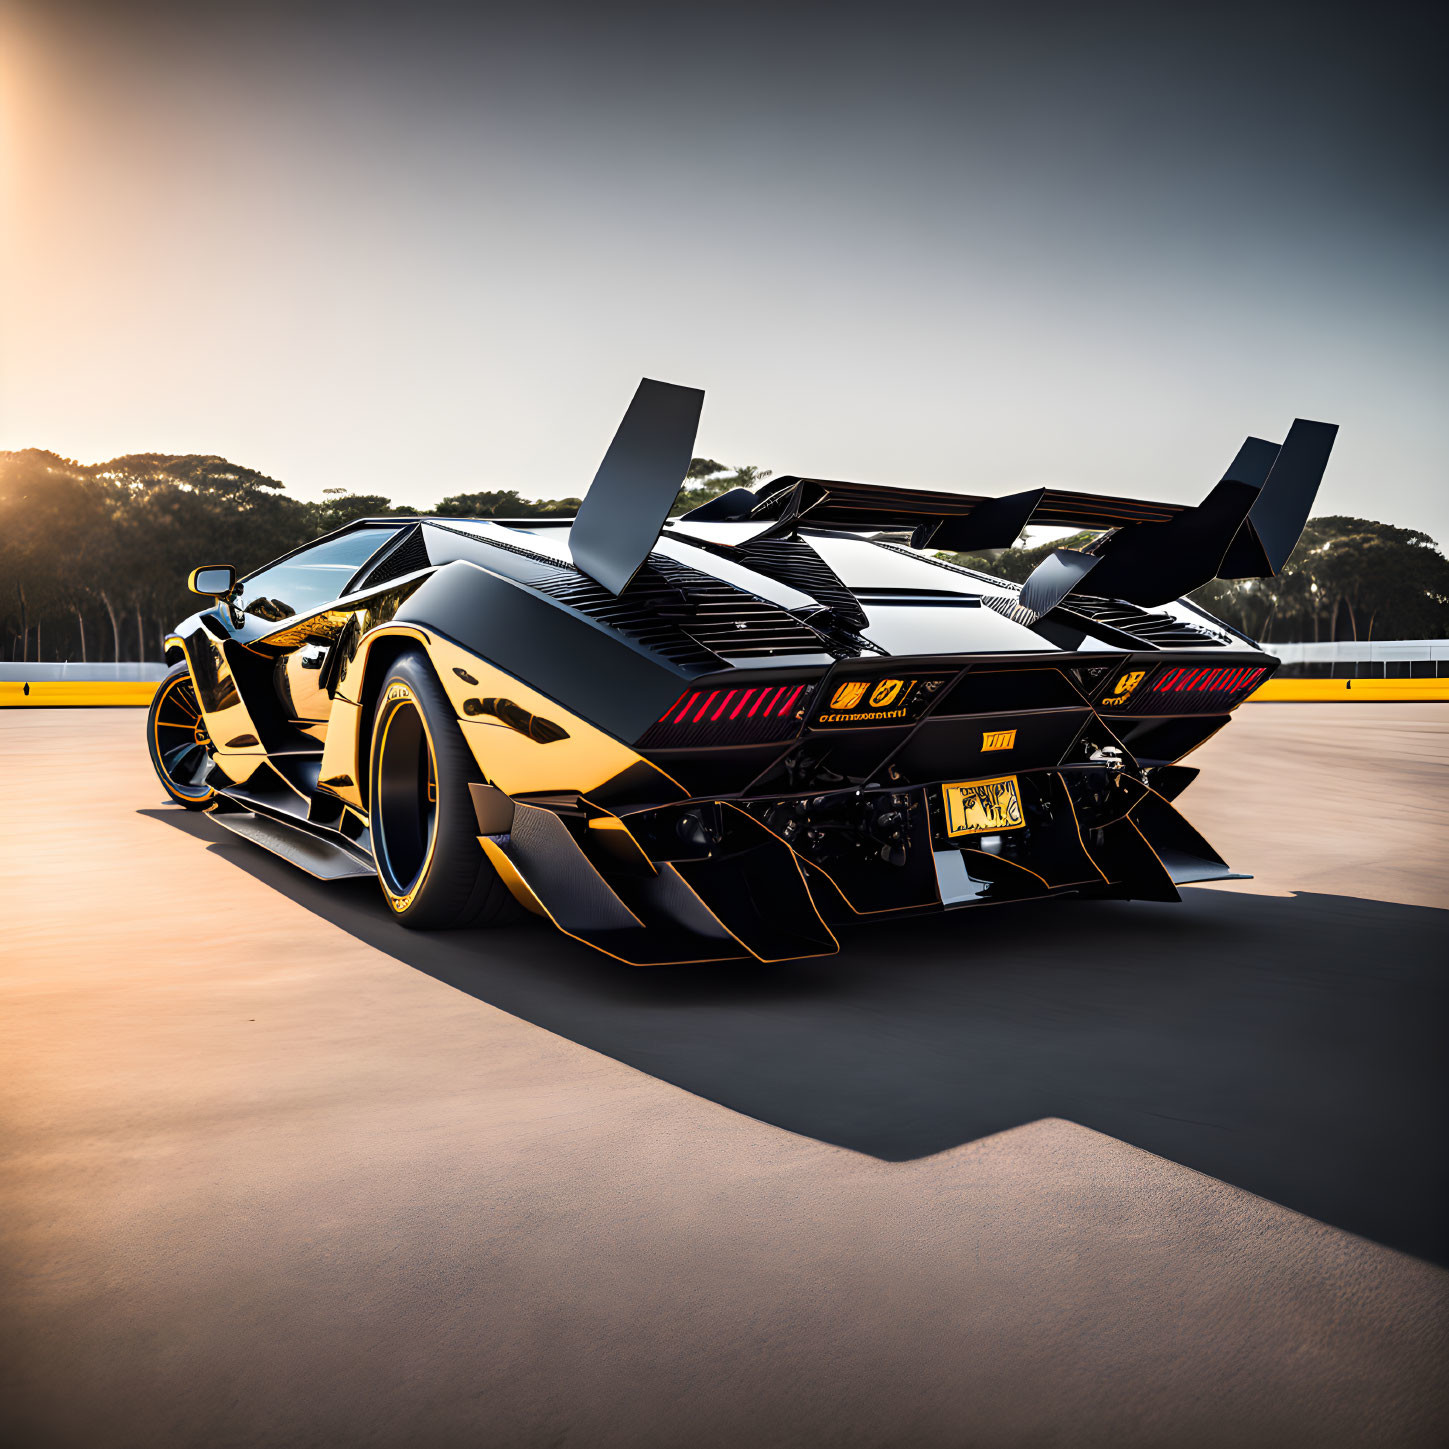 Black and Gold Sports Car with Large Rear Wing Parked on Asphalt at Sunset